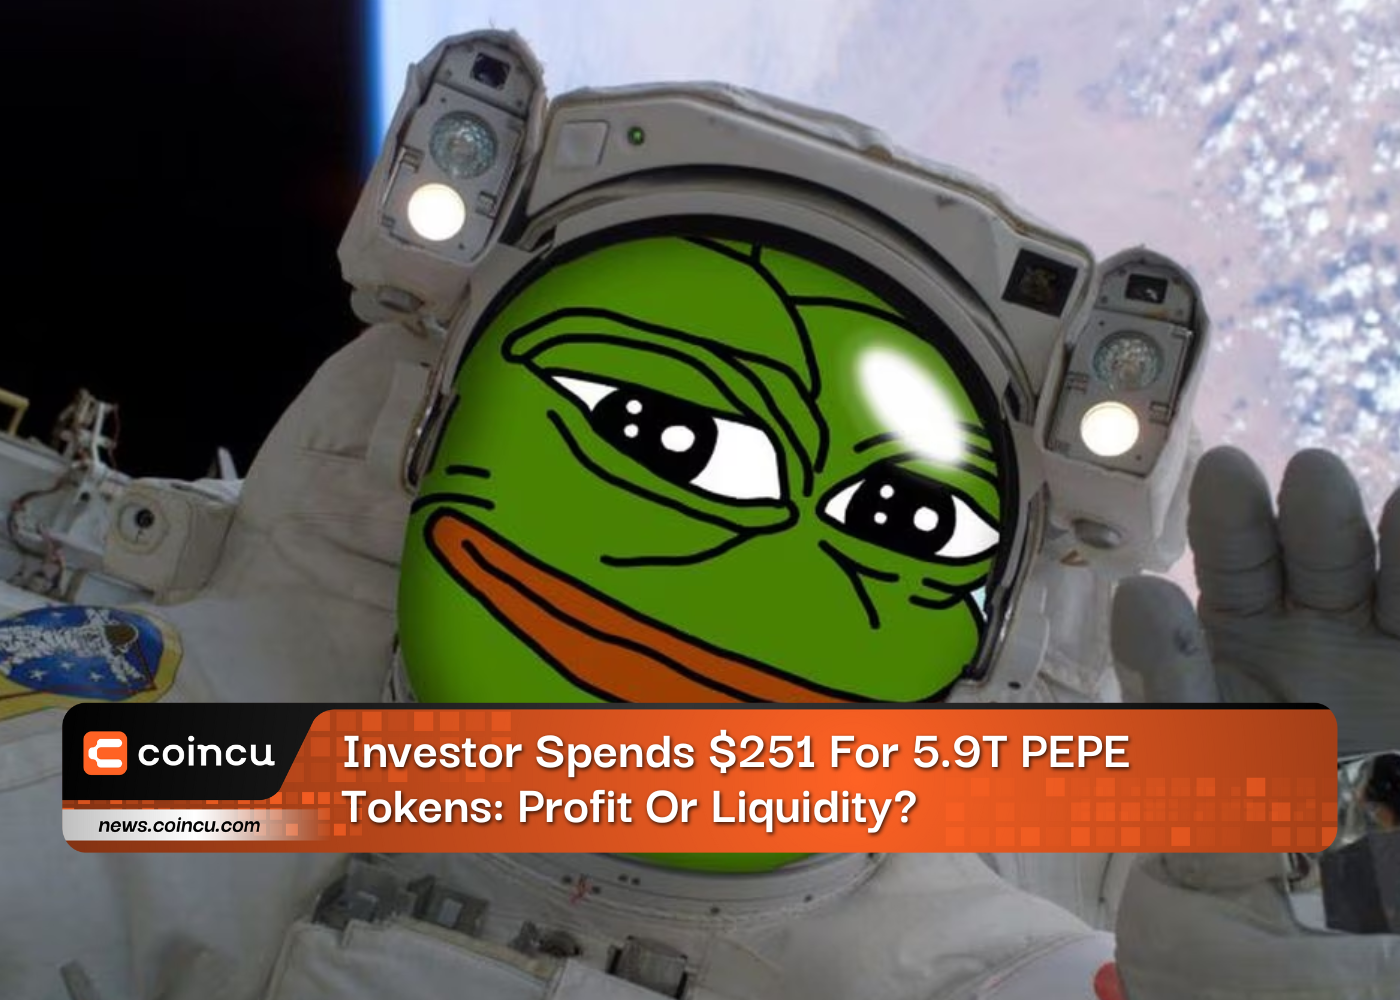 Investor Spends $251 For 5.9T PEPE Tokens: Profit Or Liquidity?